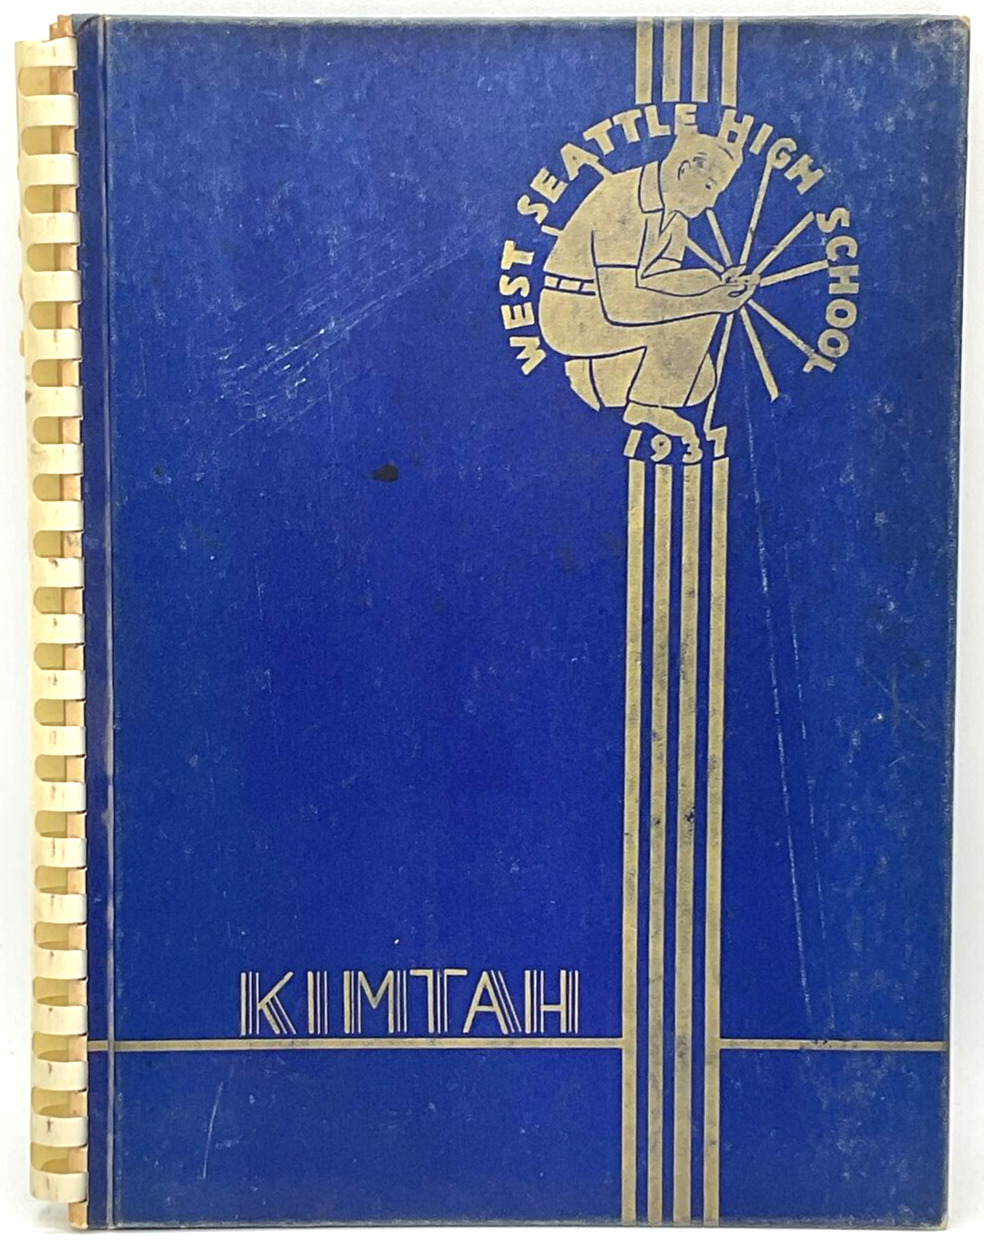 1937 West Seattle High School Annual Yearbook Kimtah Washington Sports Students